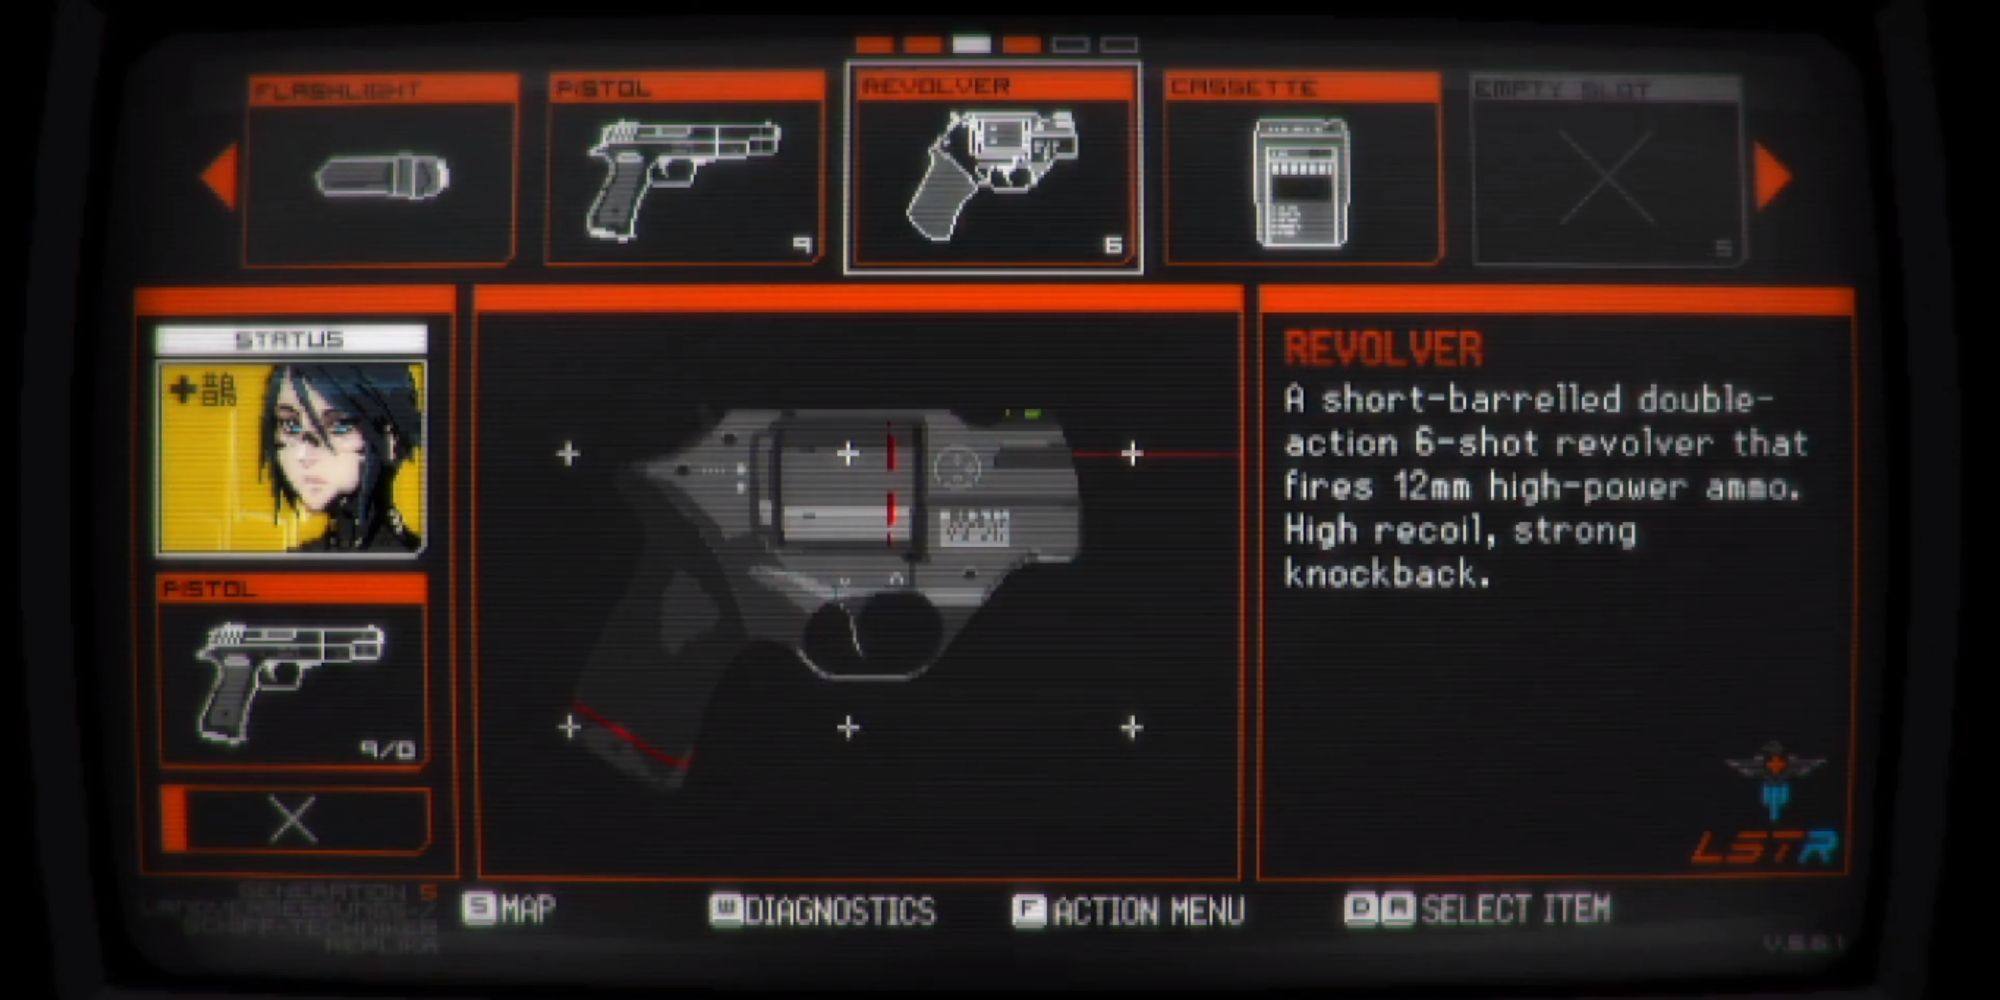 The image showing the revolver.